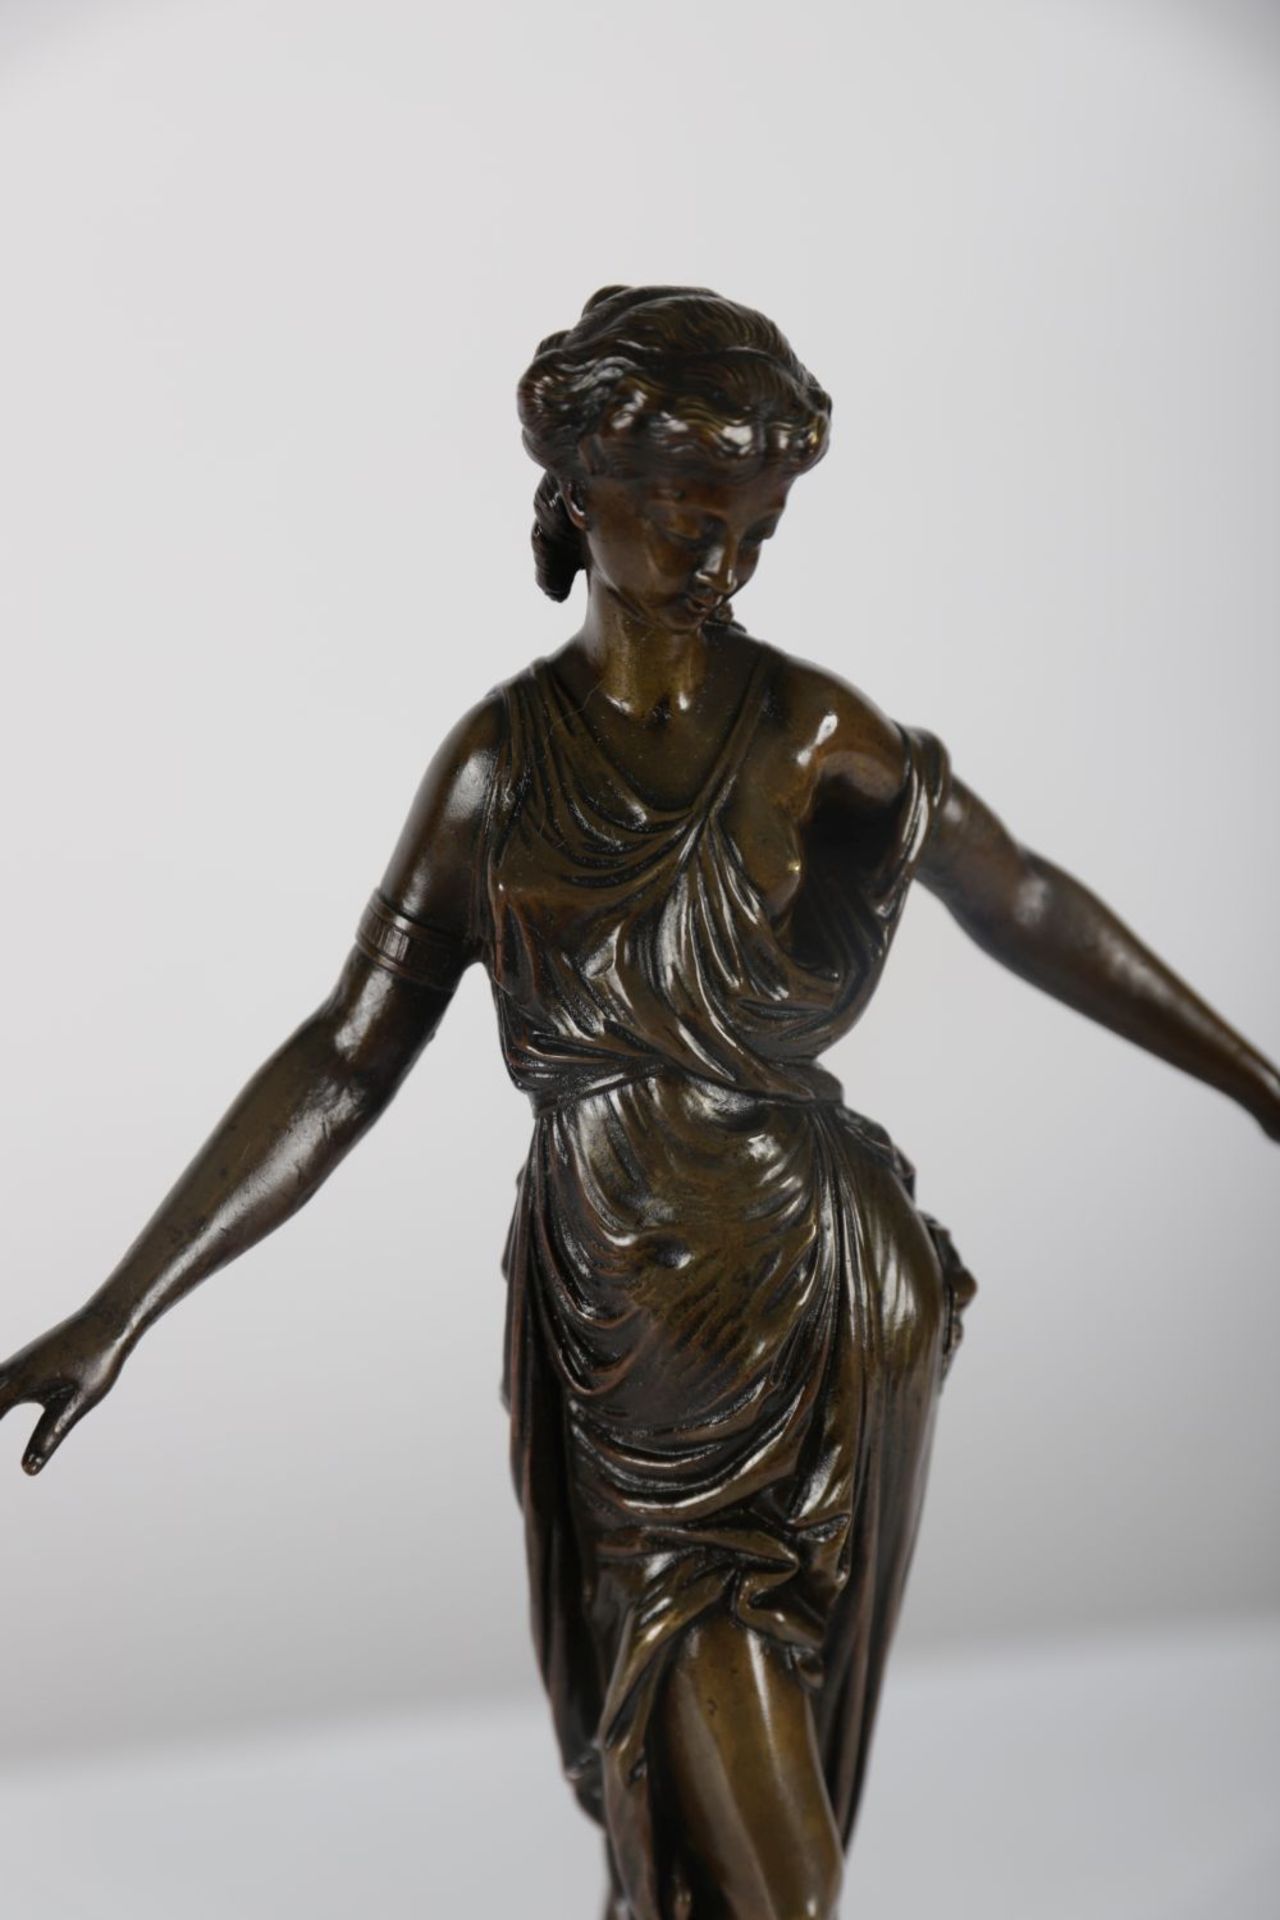 19TH-CENTURY FRENCH BRONZE SCULPTURE - Image 2 of 3